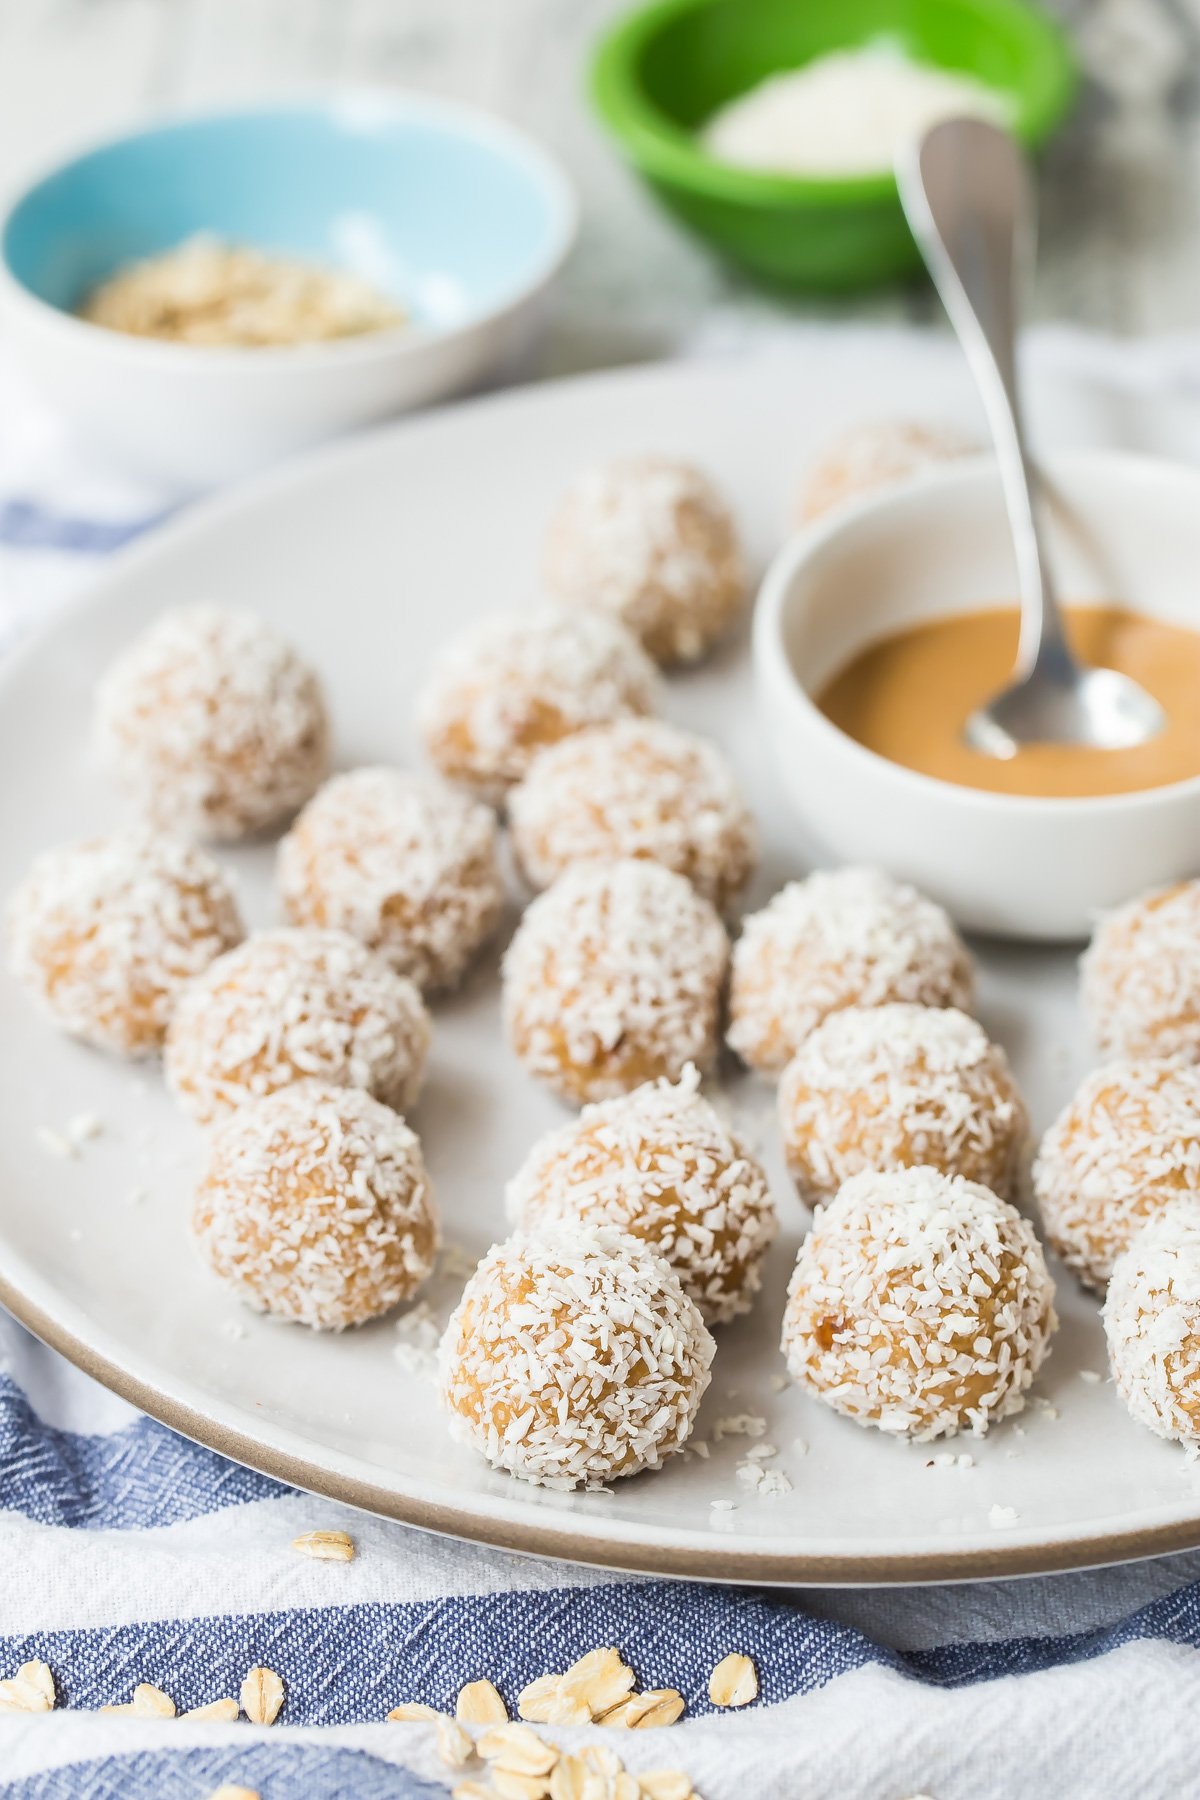 Coconut Peanut Butter Oatmeal Balls from Weelicious.com